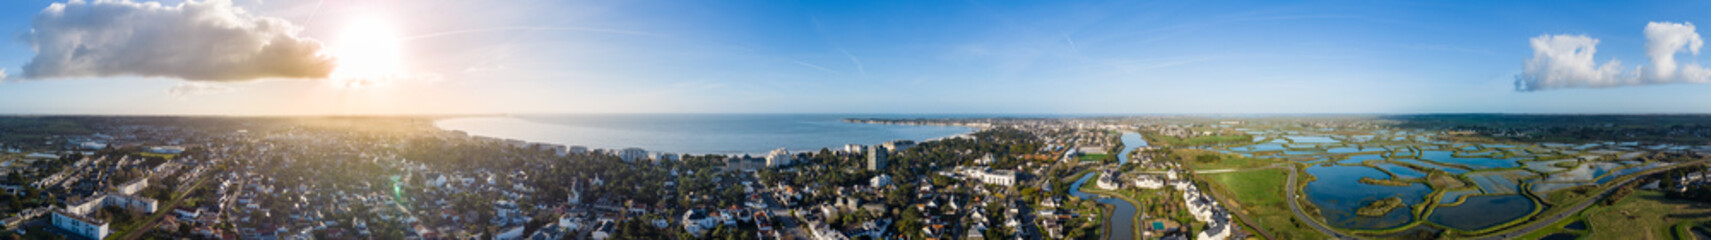 Drone panorama of La Baule Escoublac with seaside, beach and salt marshes.